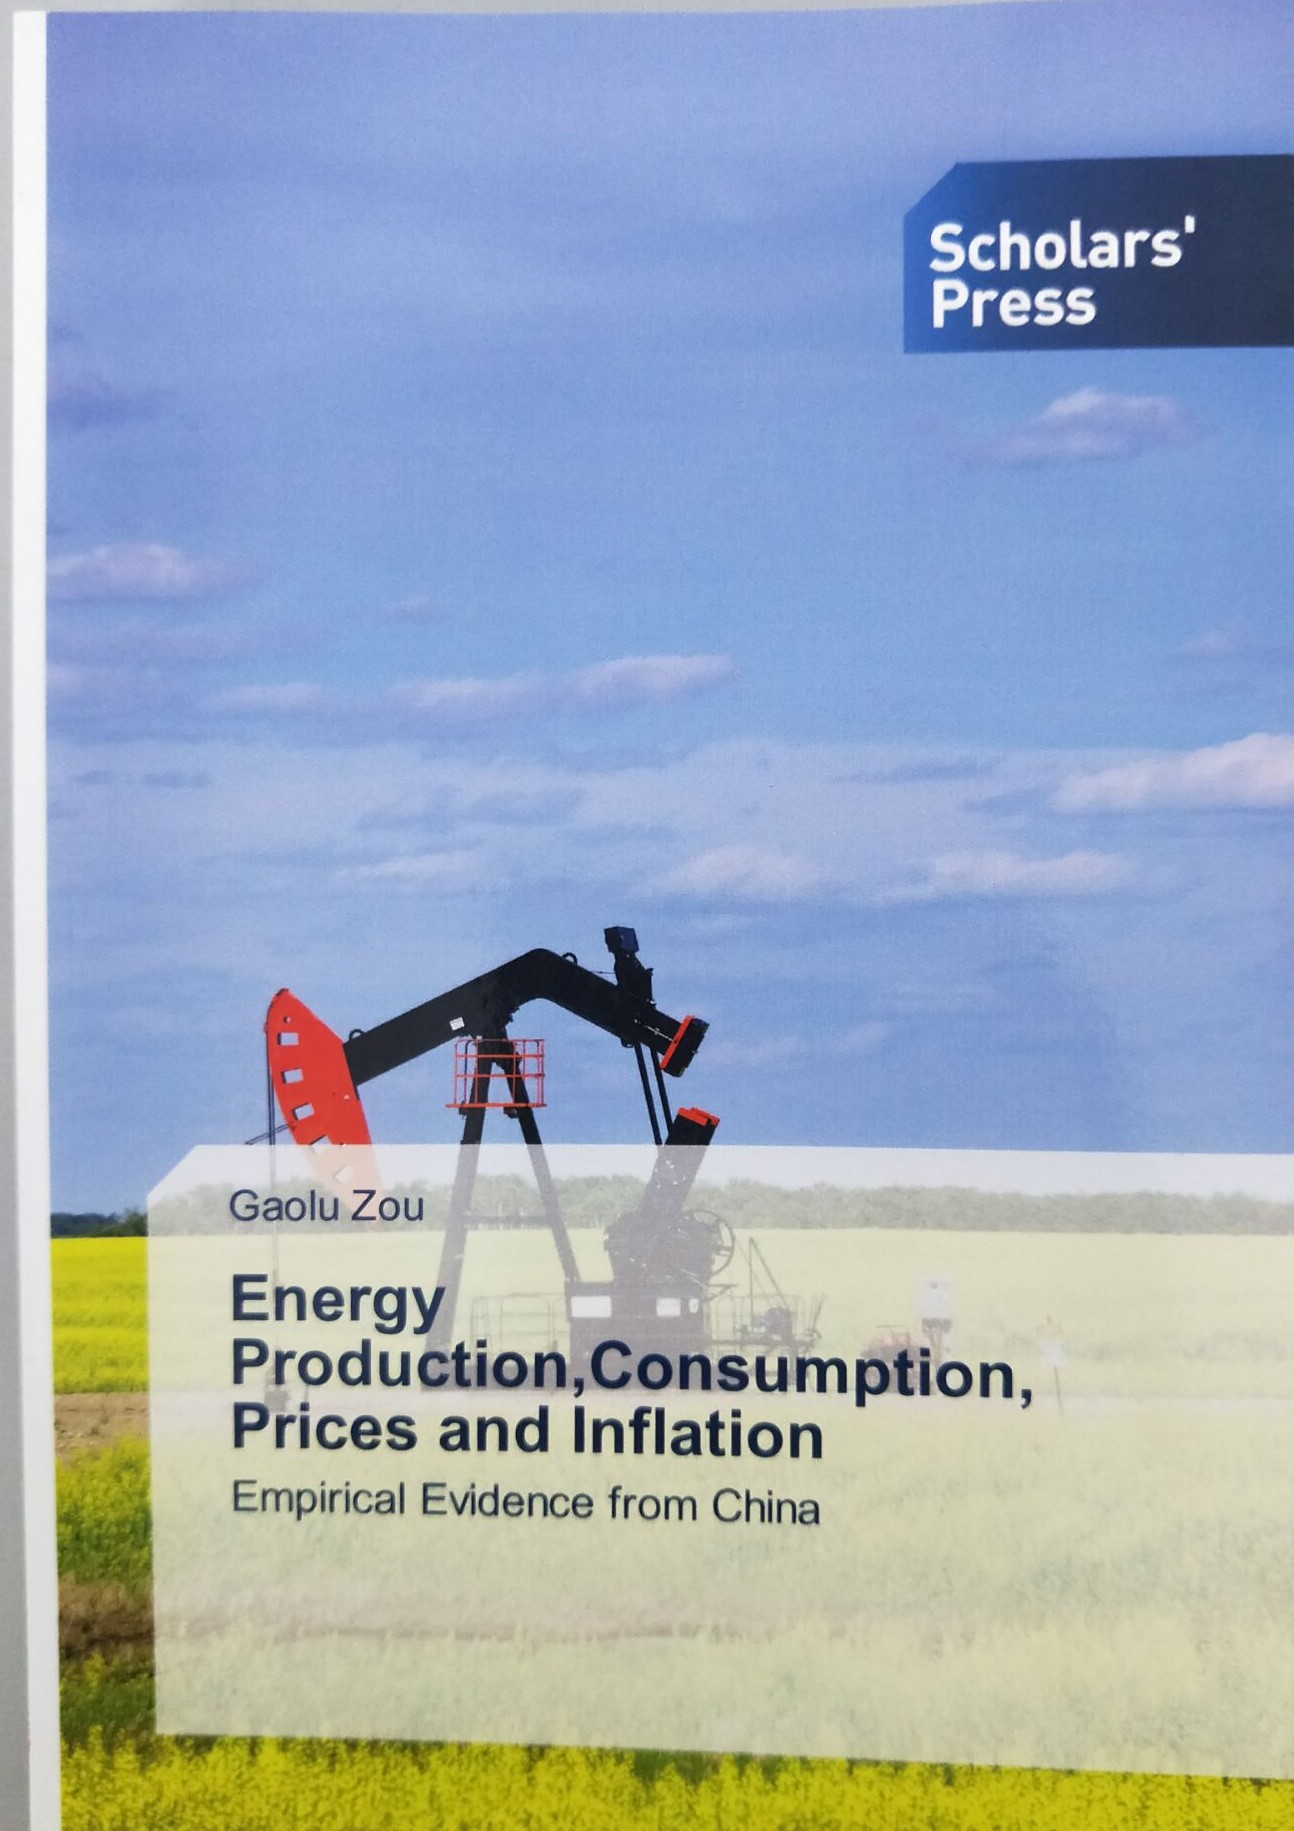 Energy Production, Consumption, Prices and Inflation - Empirical Evidence from China.jpg